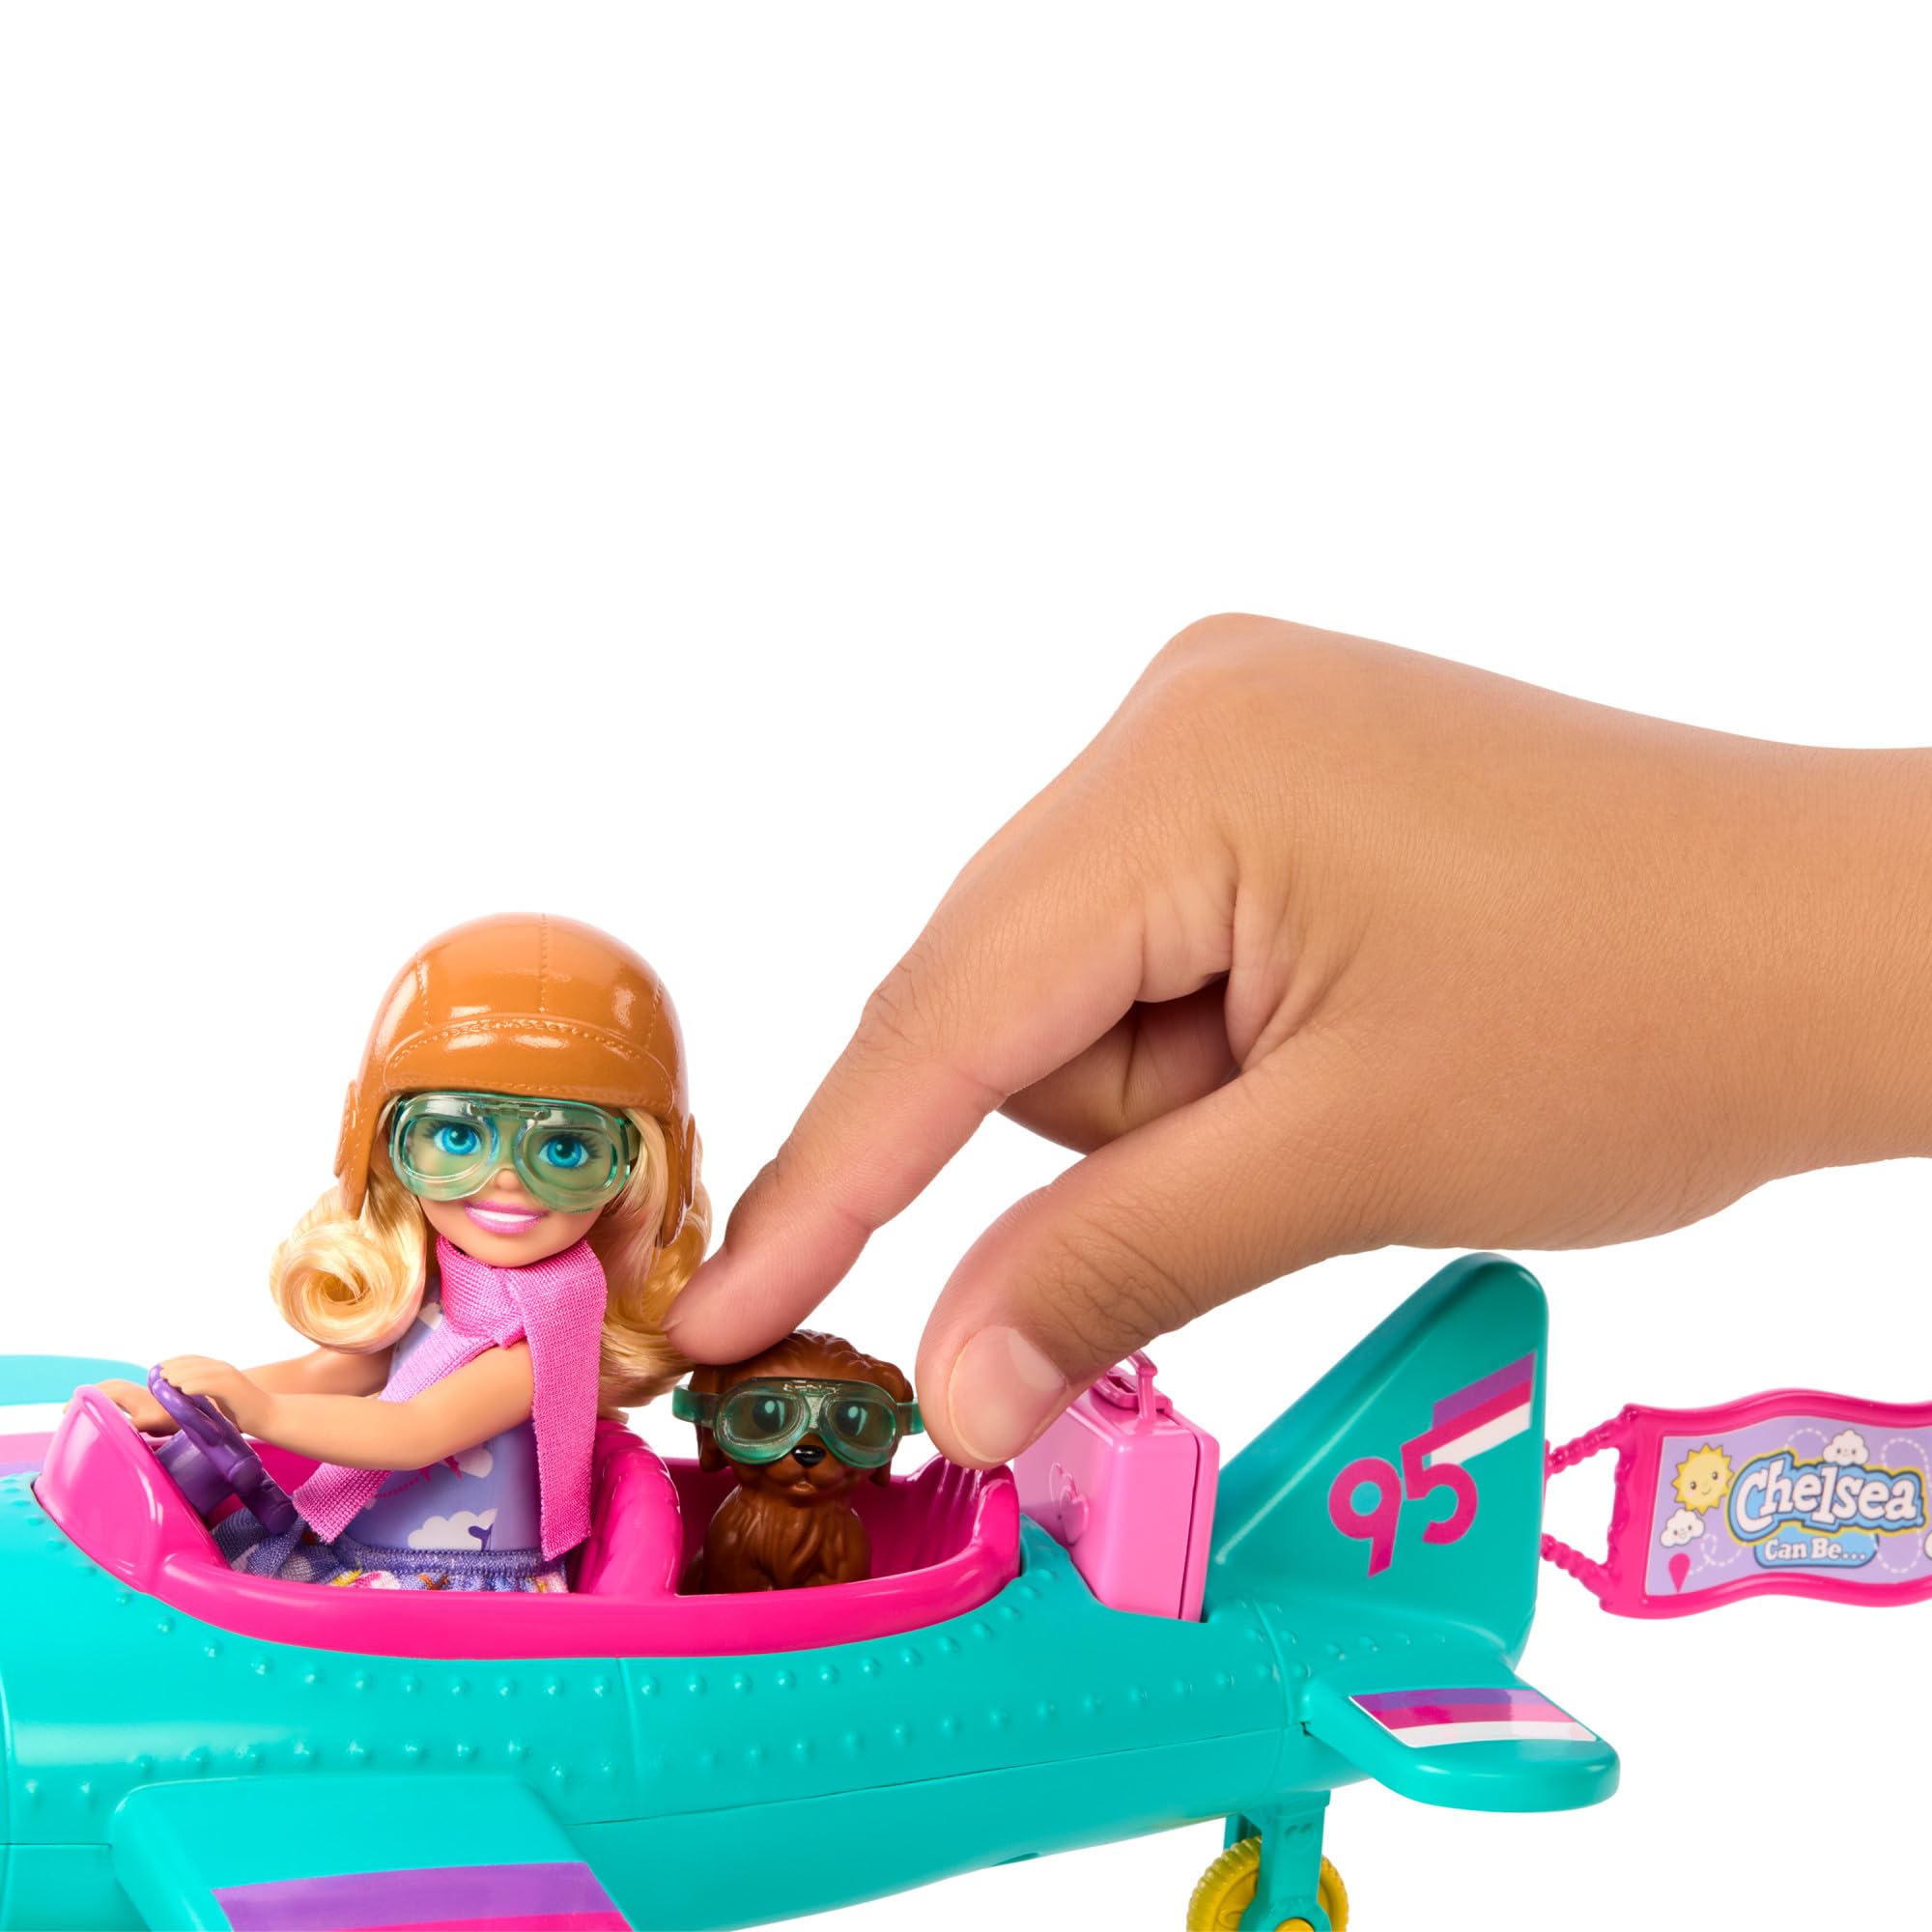 Barbie Chelsea Can Be… Doll & Plane Playset, 2-Seater Aircraft with Spinning Daisy Propellor & 7 Accessories, Including Puppy & Stickers